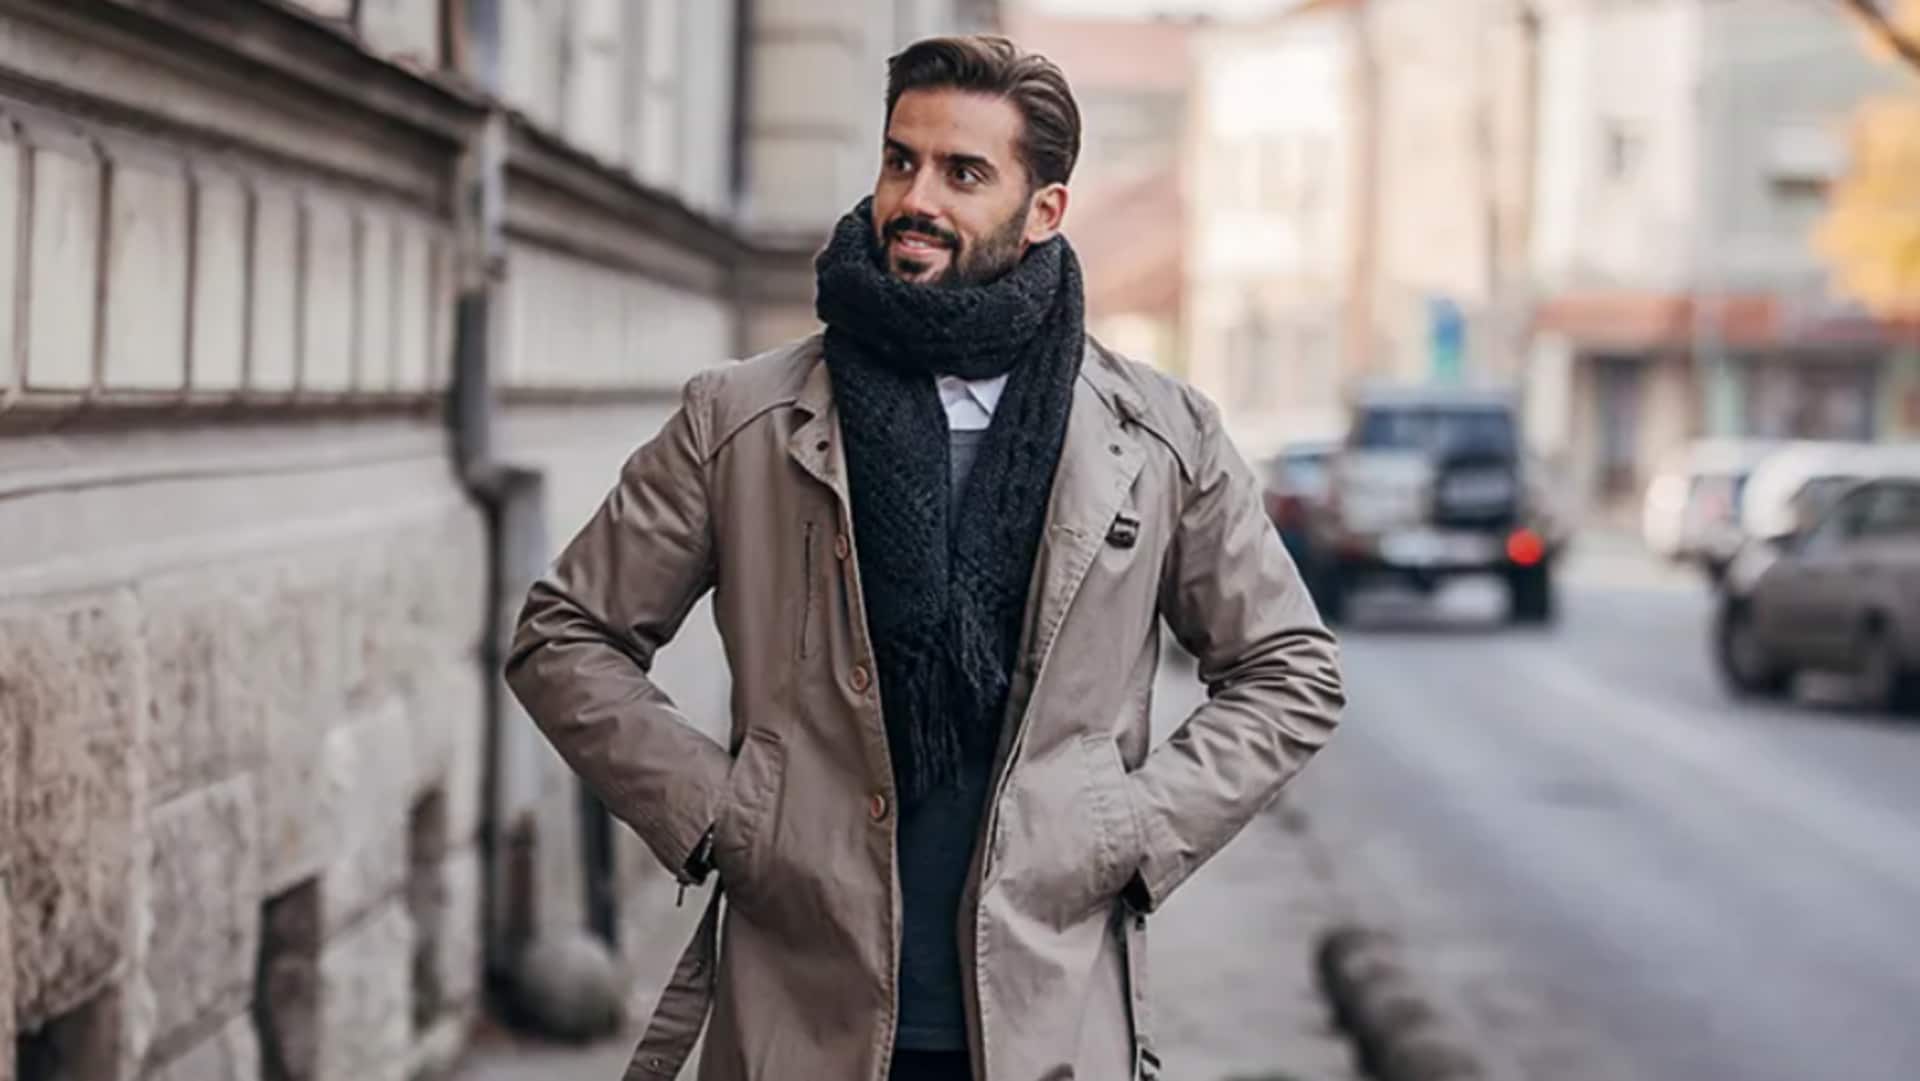 A style guide to wearing winter coats for street chic